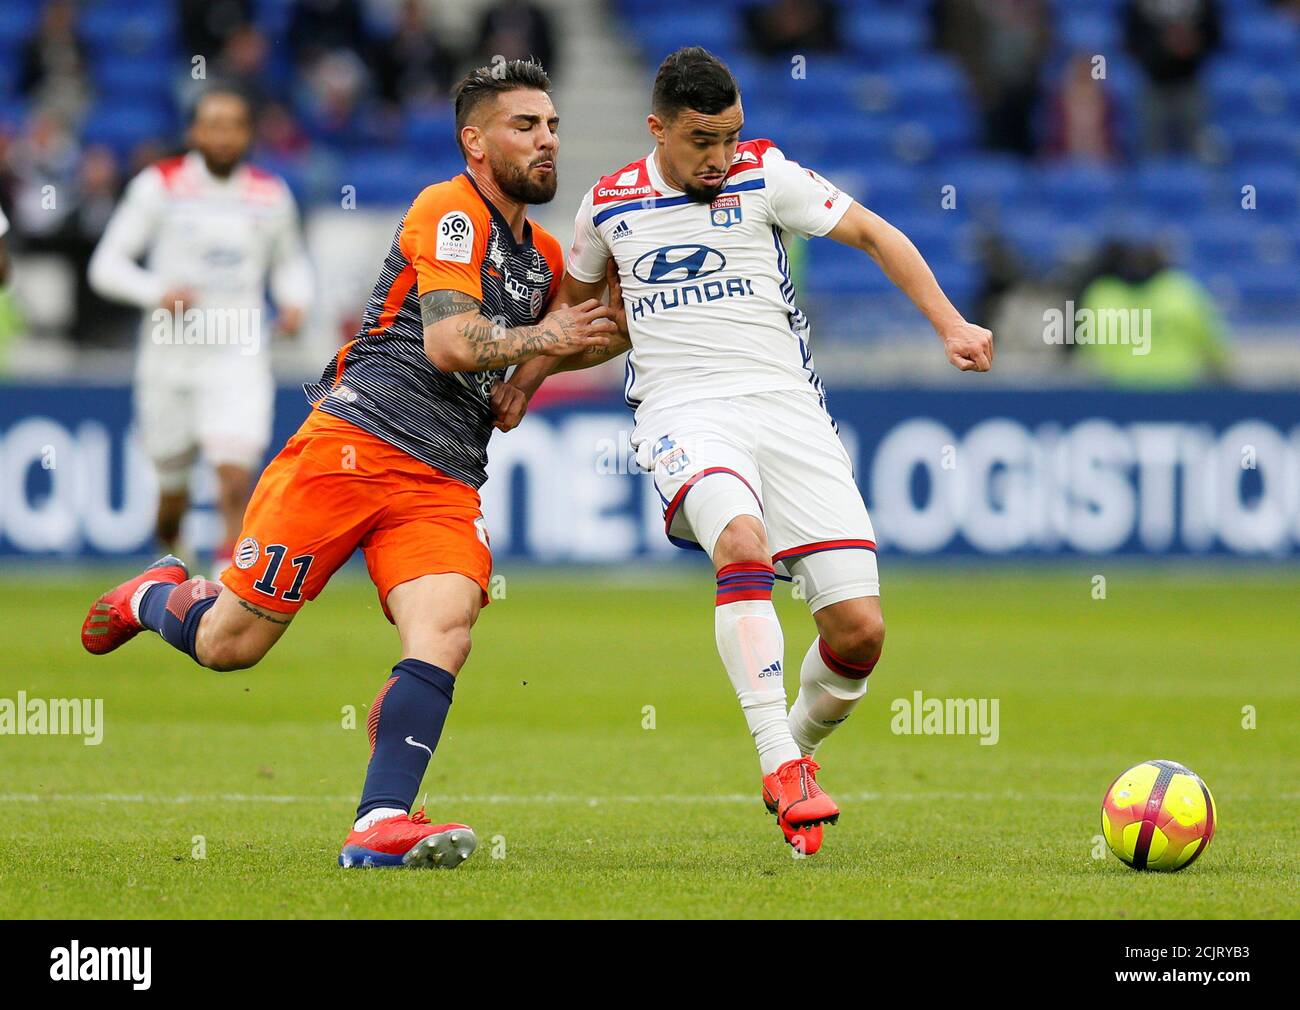 Soccer Football - Ligue 1 - Olympique Lyonnais v Montpellier - Groupama  Stadium, Lyon, France - March 17, 2019 Montpellier's Andy Delort in action  with Lyon's Rafael REUTERS/Emmanuel Foudrot Stock Photo - Alamy